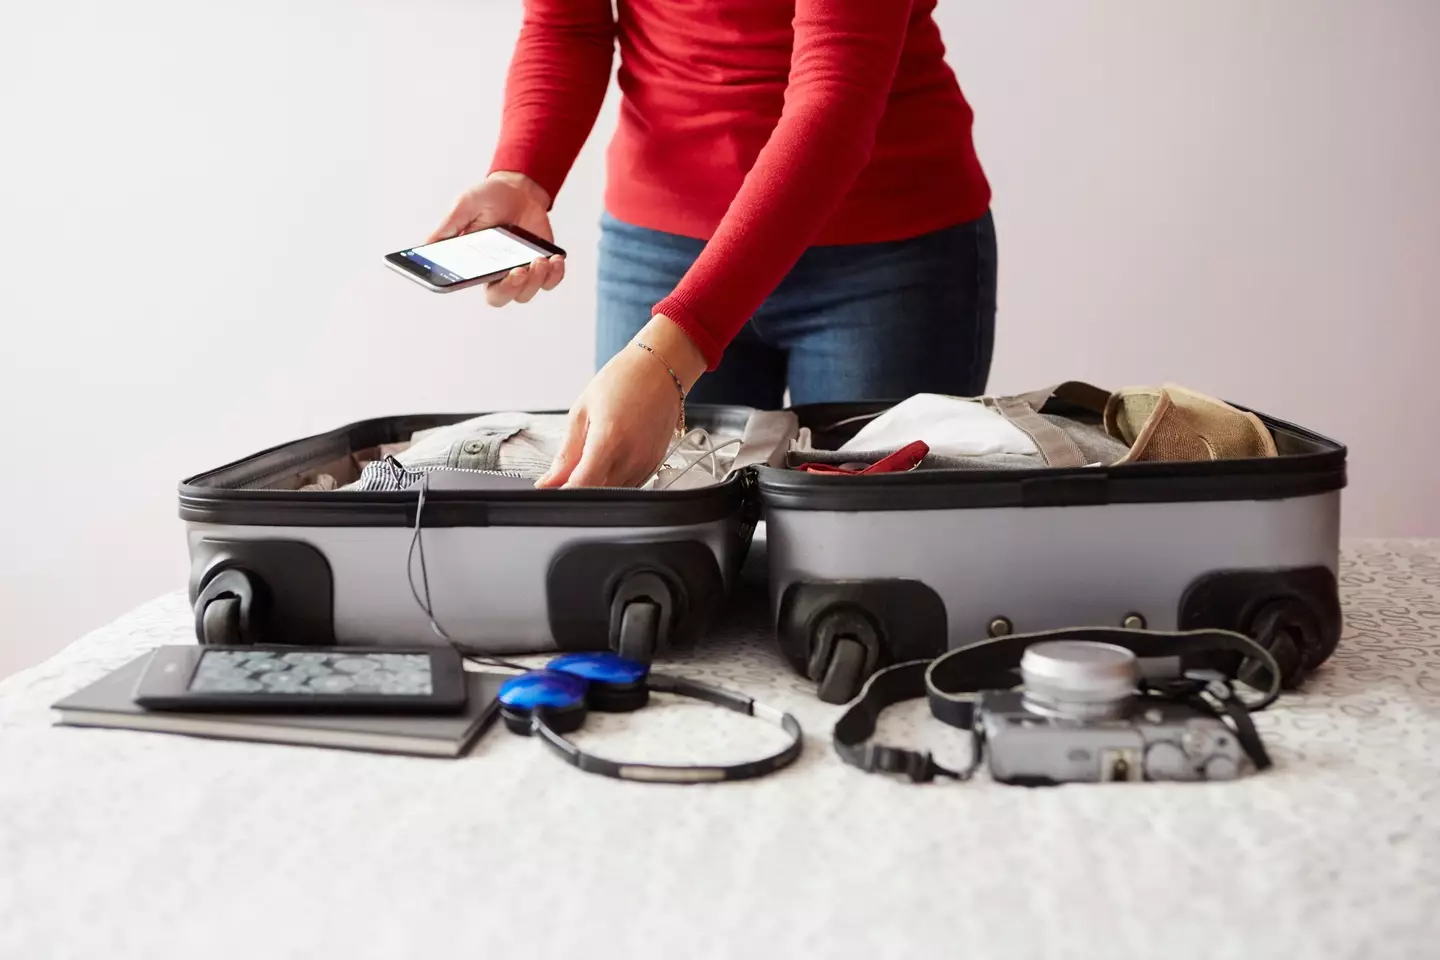 A woman has revealed the ingenious items she packs to go on holiday.